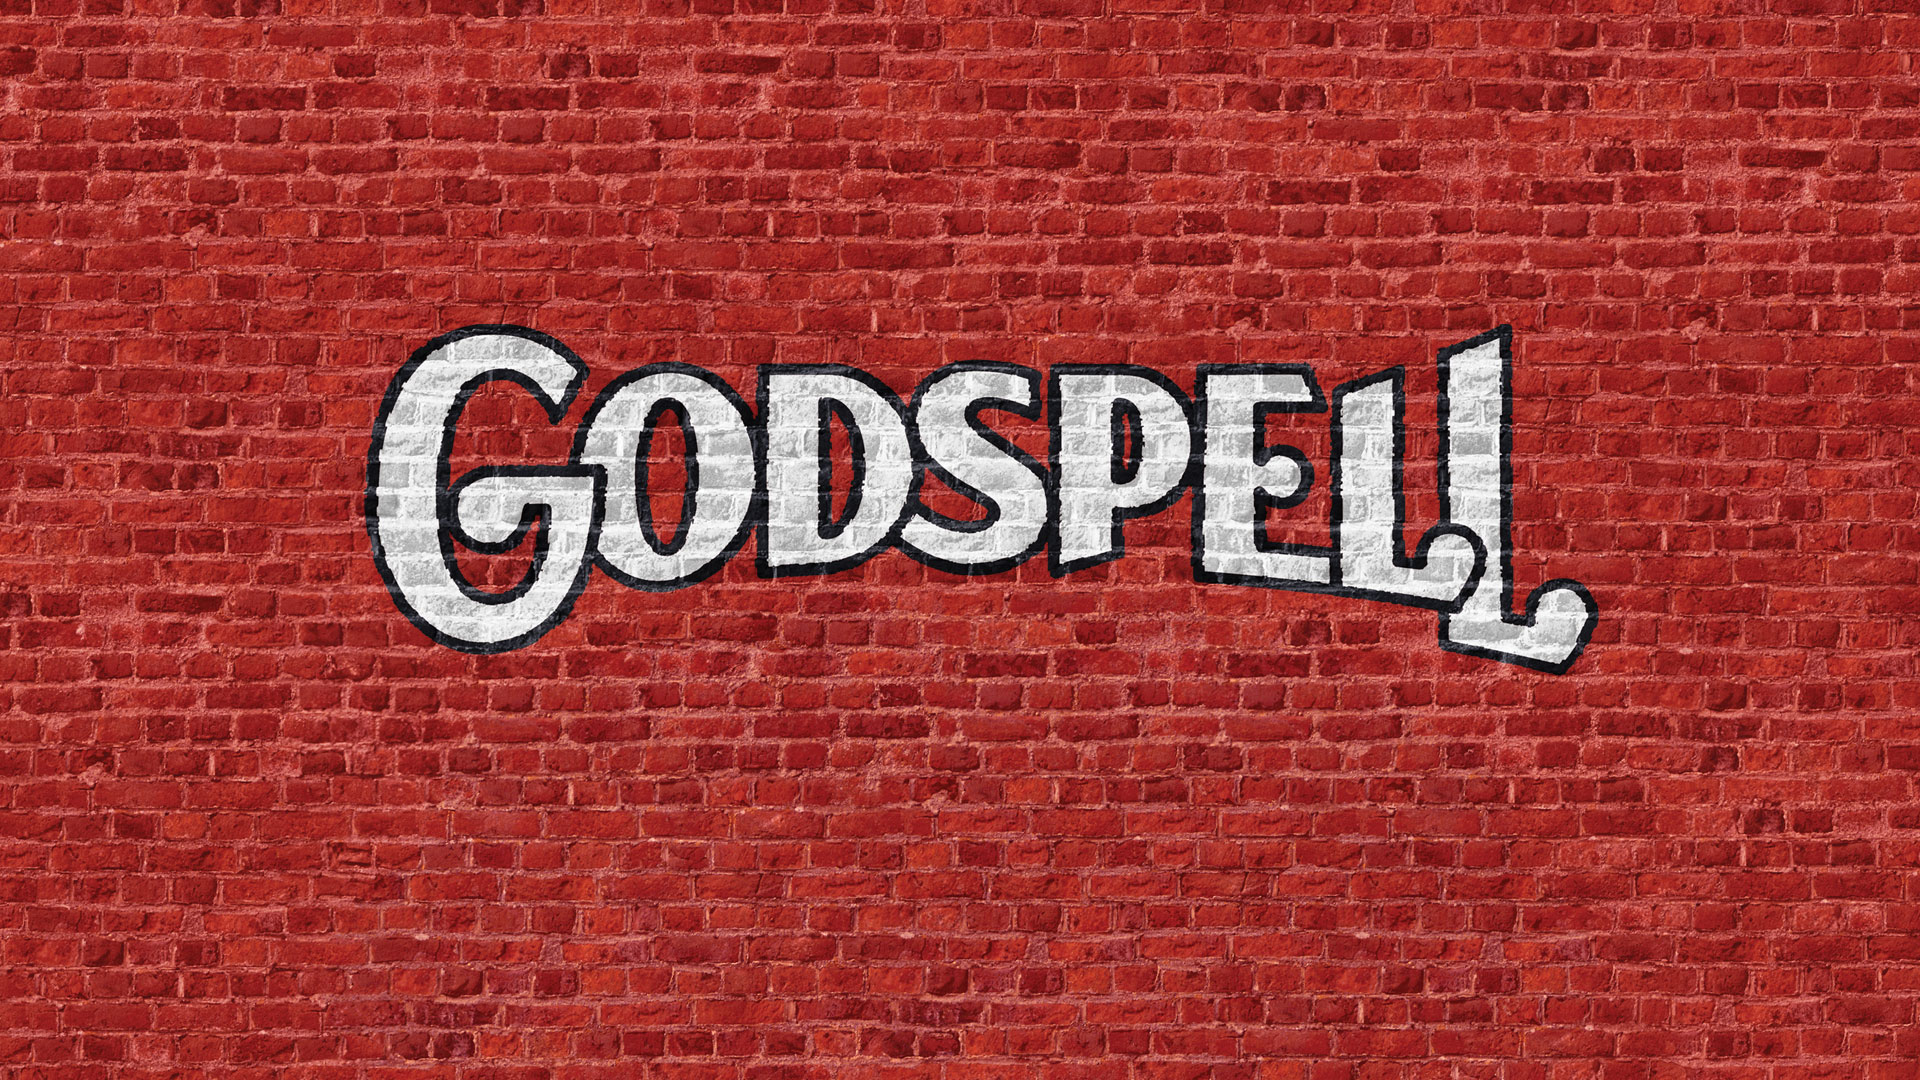 WSCC offering auditions for ‘Godspell’